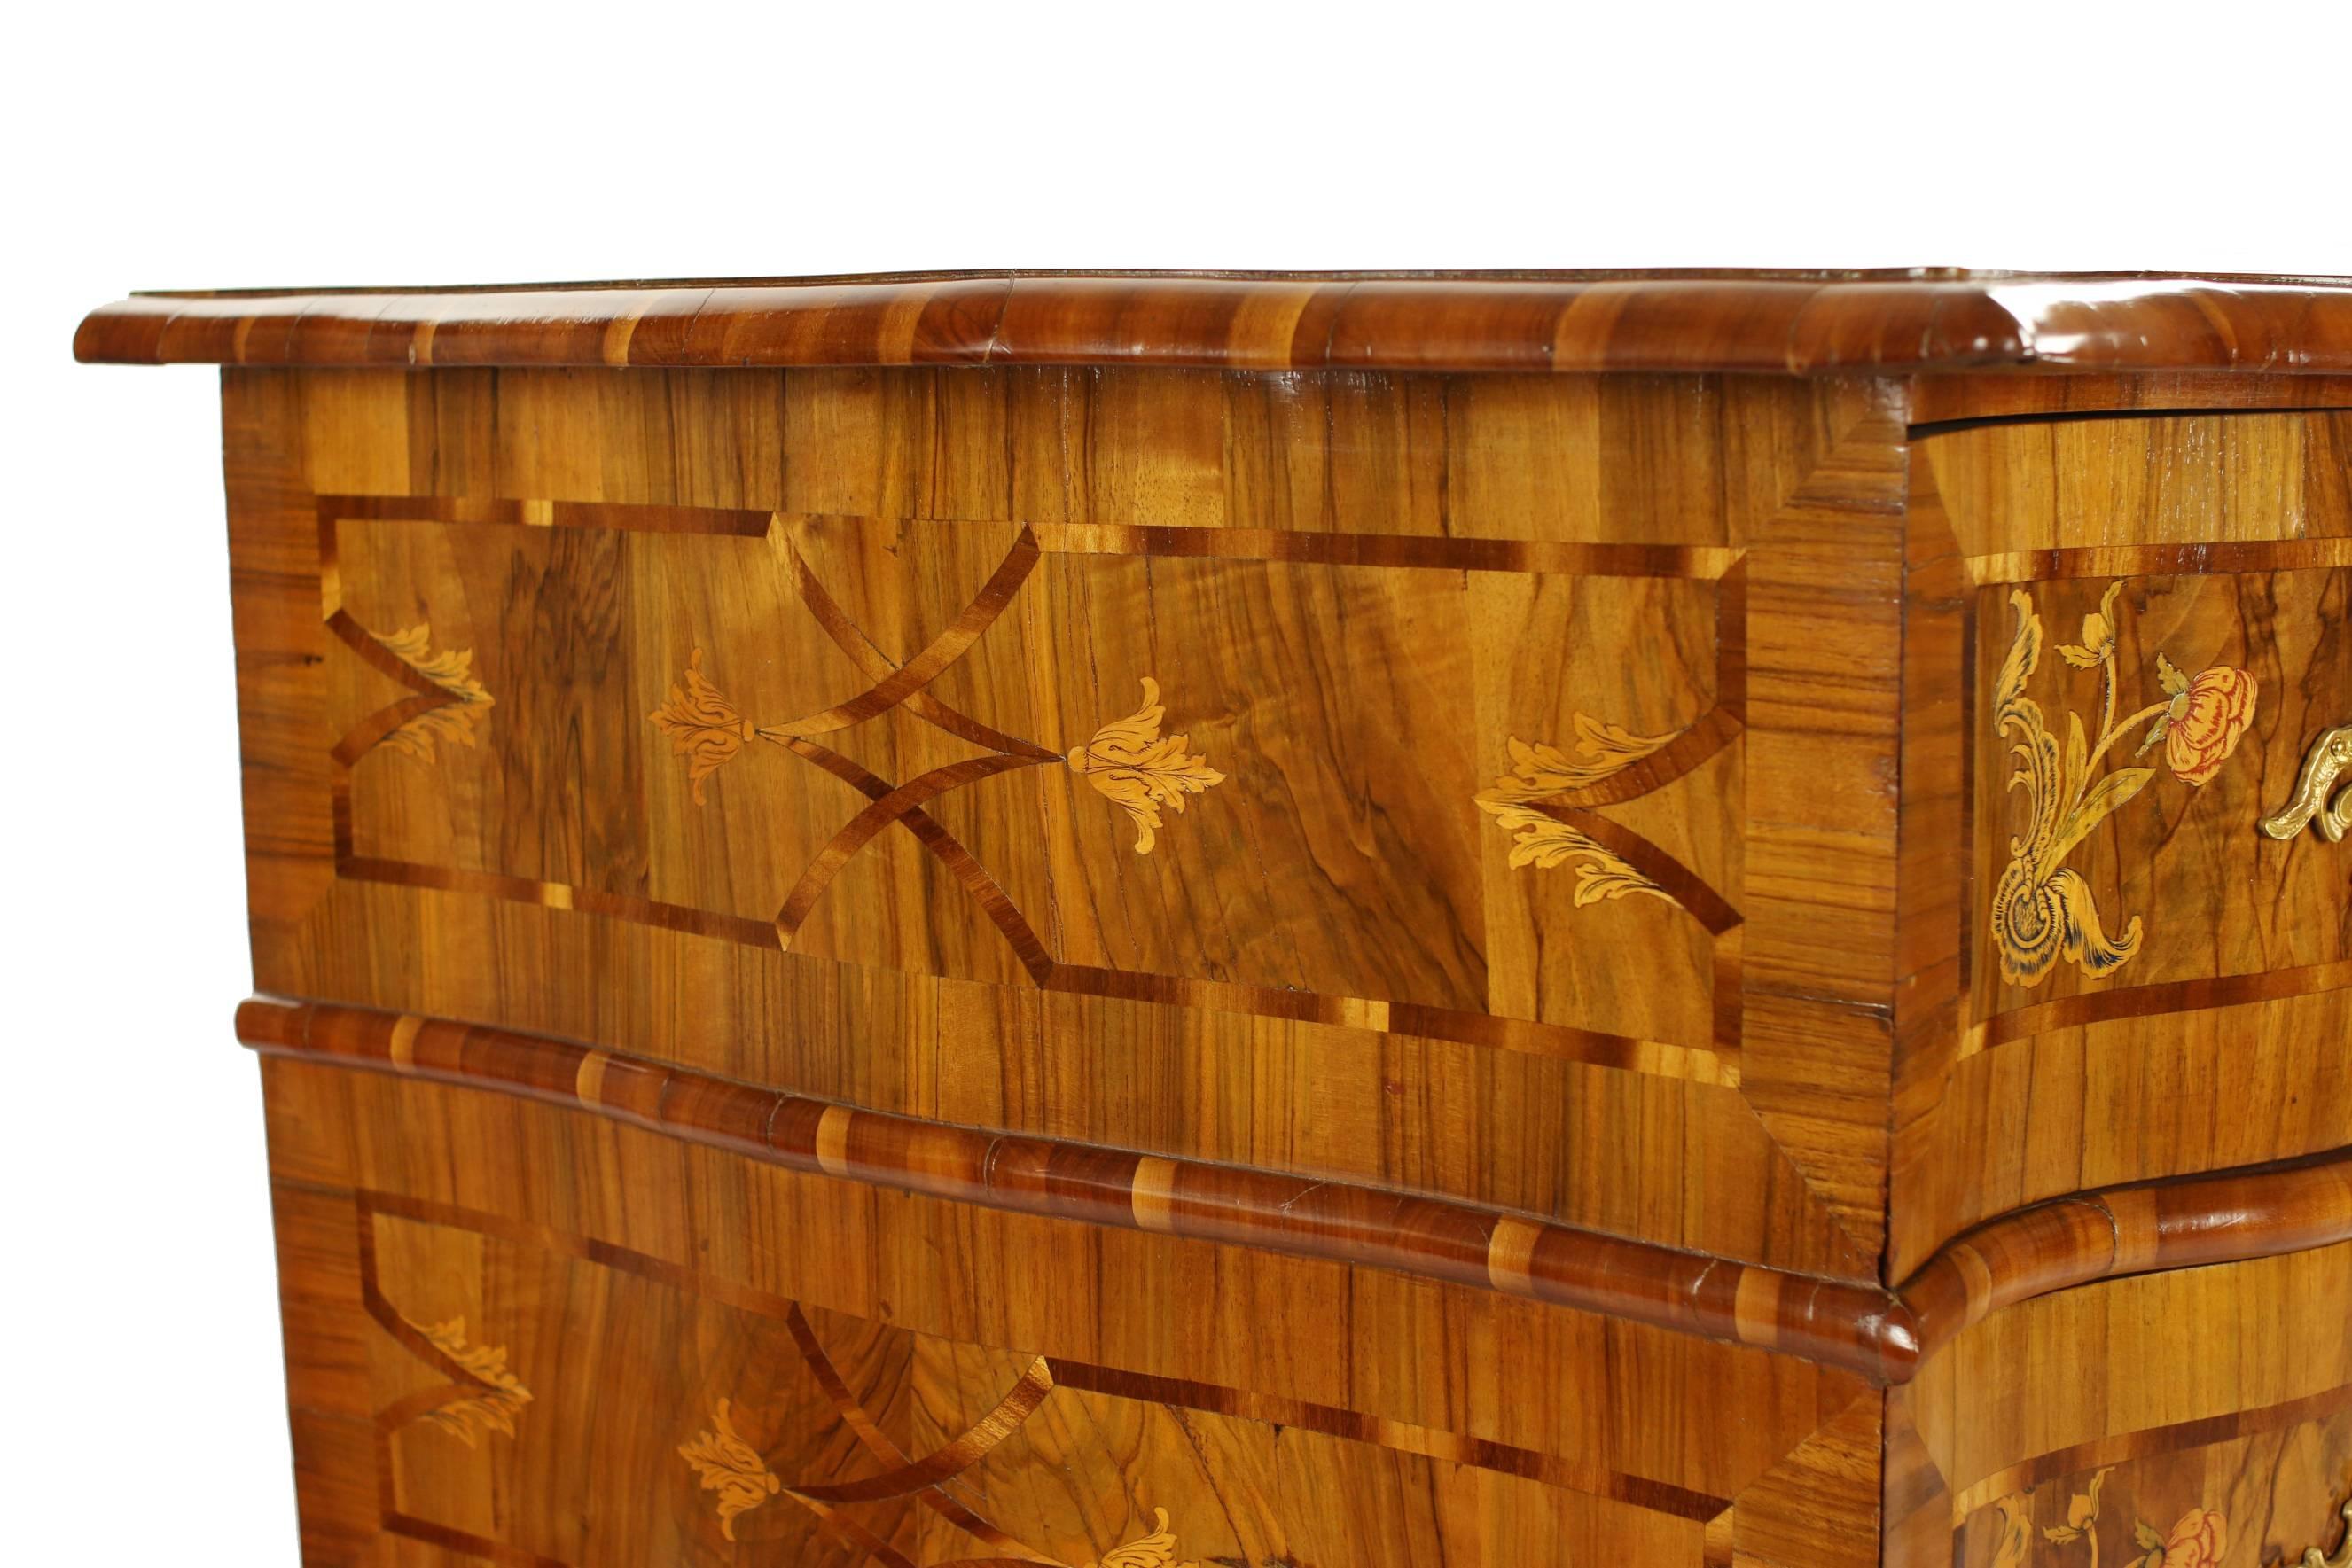 Baroque Chest of Drawers, Erfurt, circa 1750, Nut and Root Wood, Inlaid Works 2